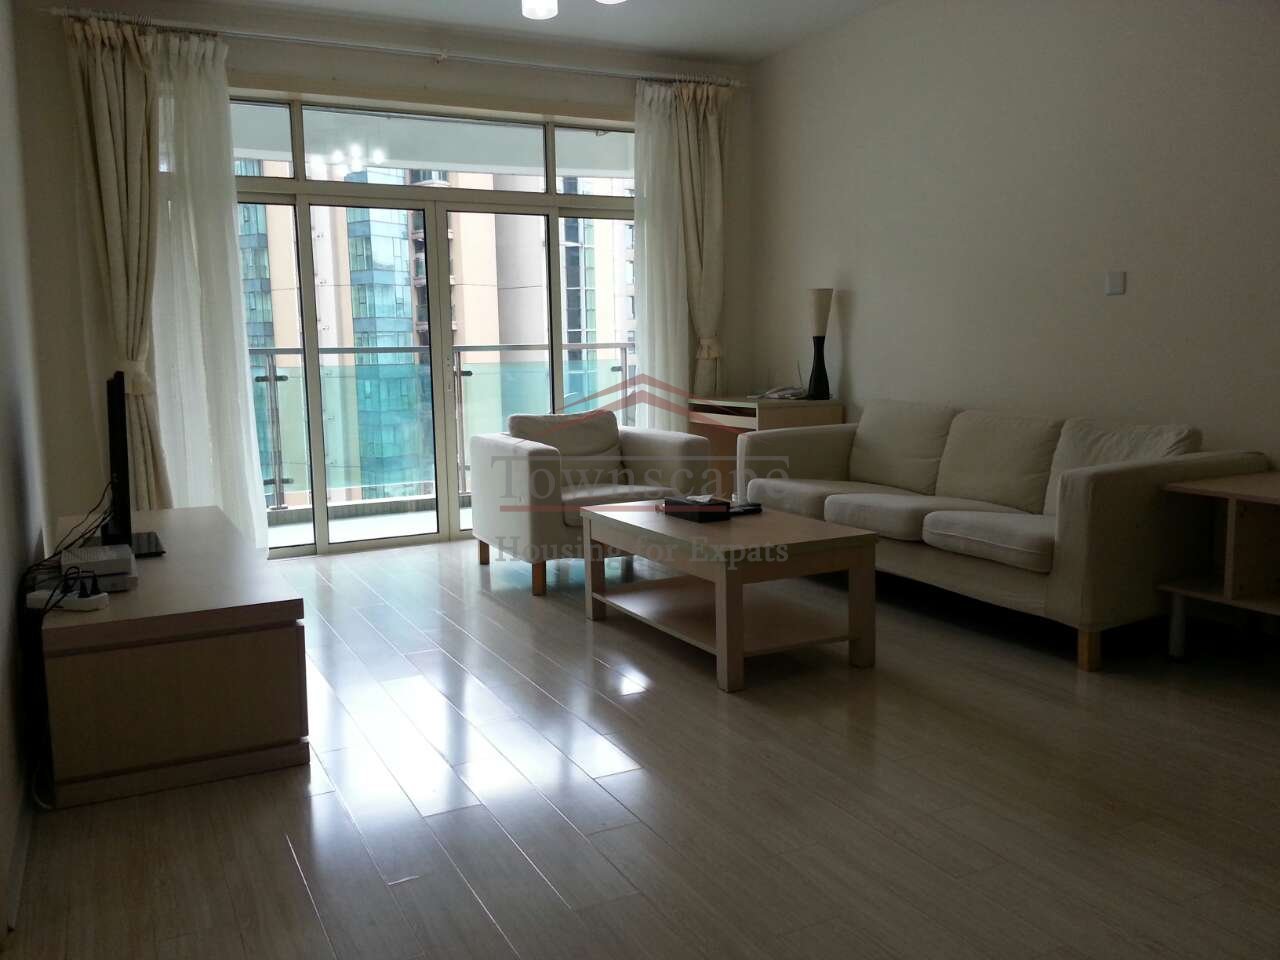 rent an apartment in Shanghai Spotless 2 bedroom apartment at West Nanjing Road L2